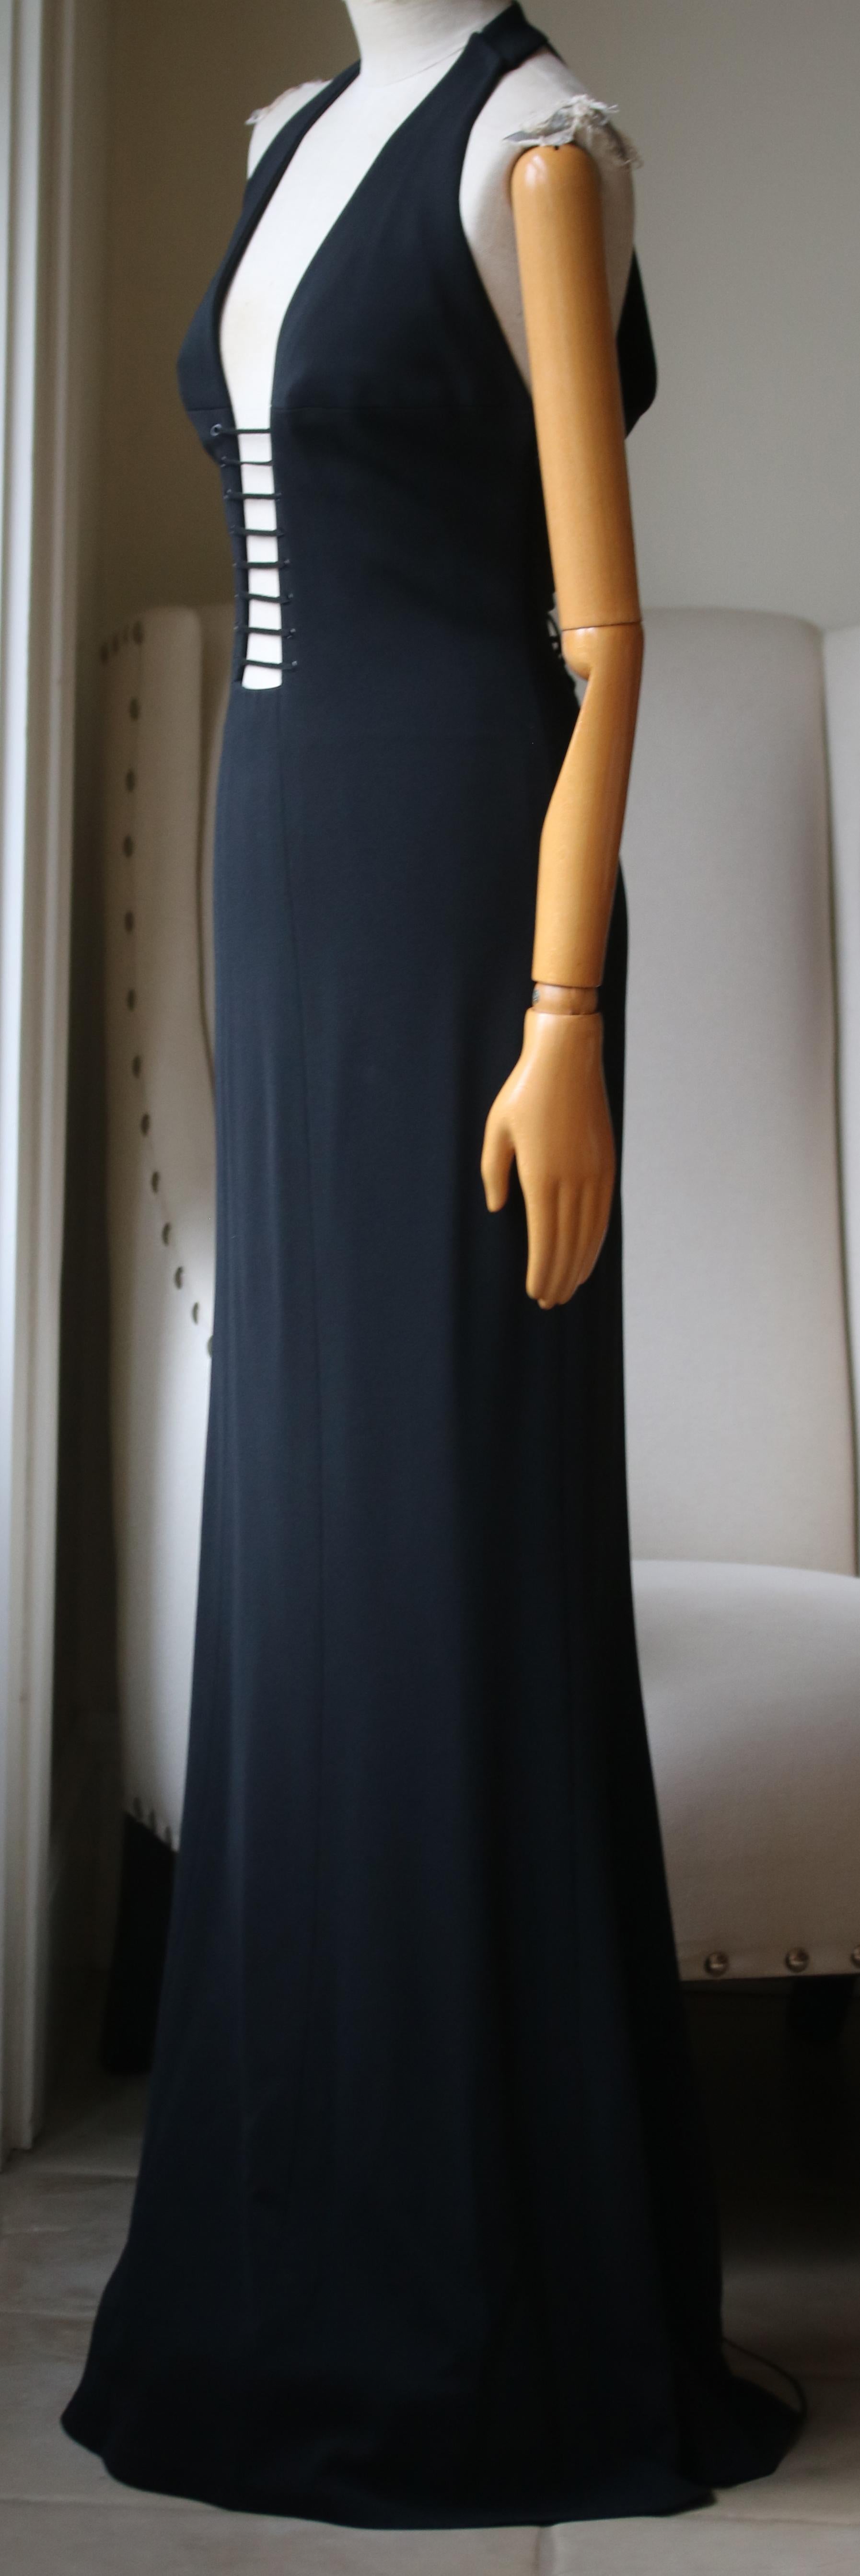 Azzedine Alaïa Haute Couture 2003 gown with lace up detail down the back. Deep v neck with cutout detail. Satin panels on the back. Size label has been cutout for comfort. 

Size: FR 40 (UK 12, US 8, IT 44)

Dimensions: Approx. 
Bust - 83.8 cm / 33